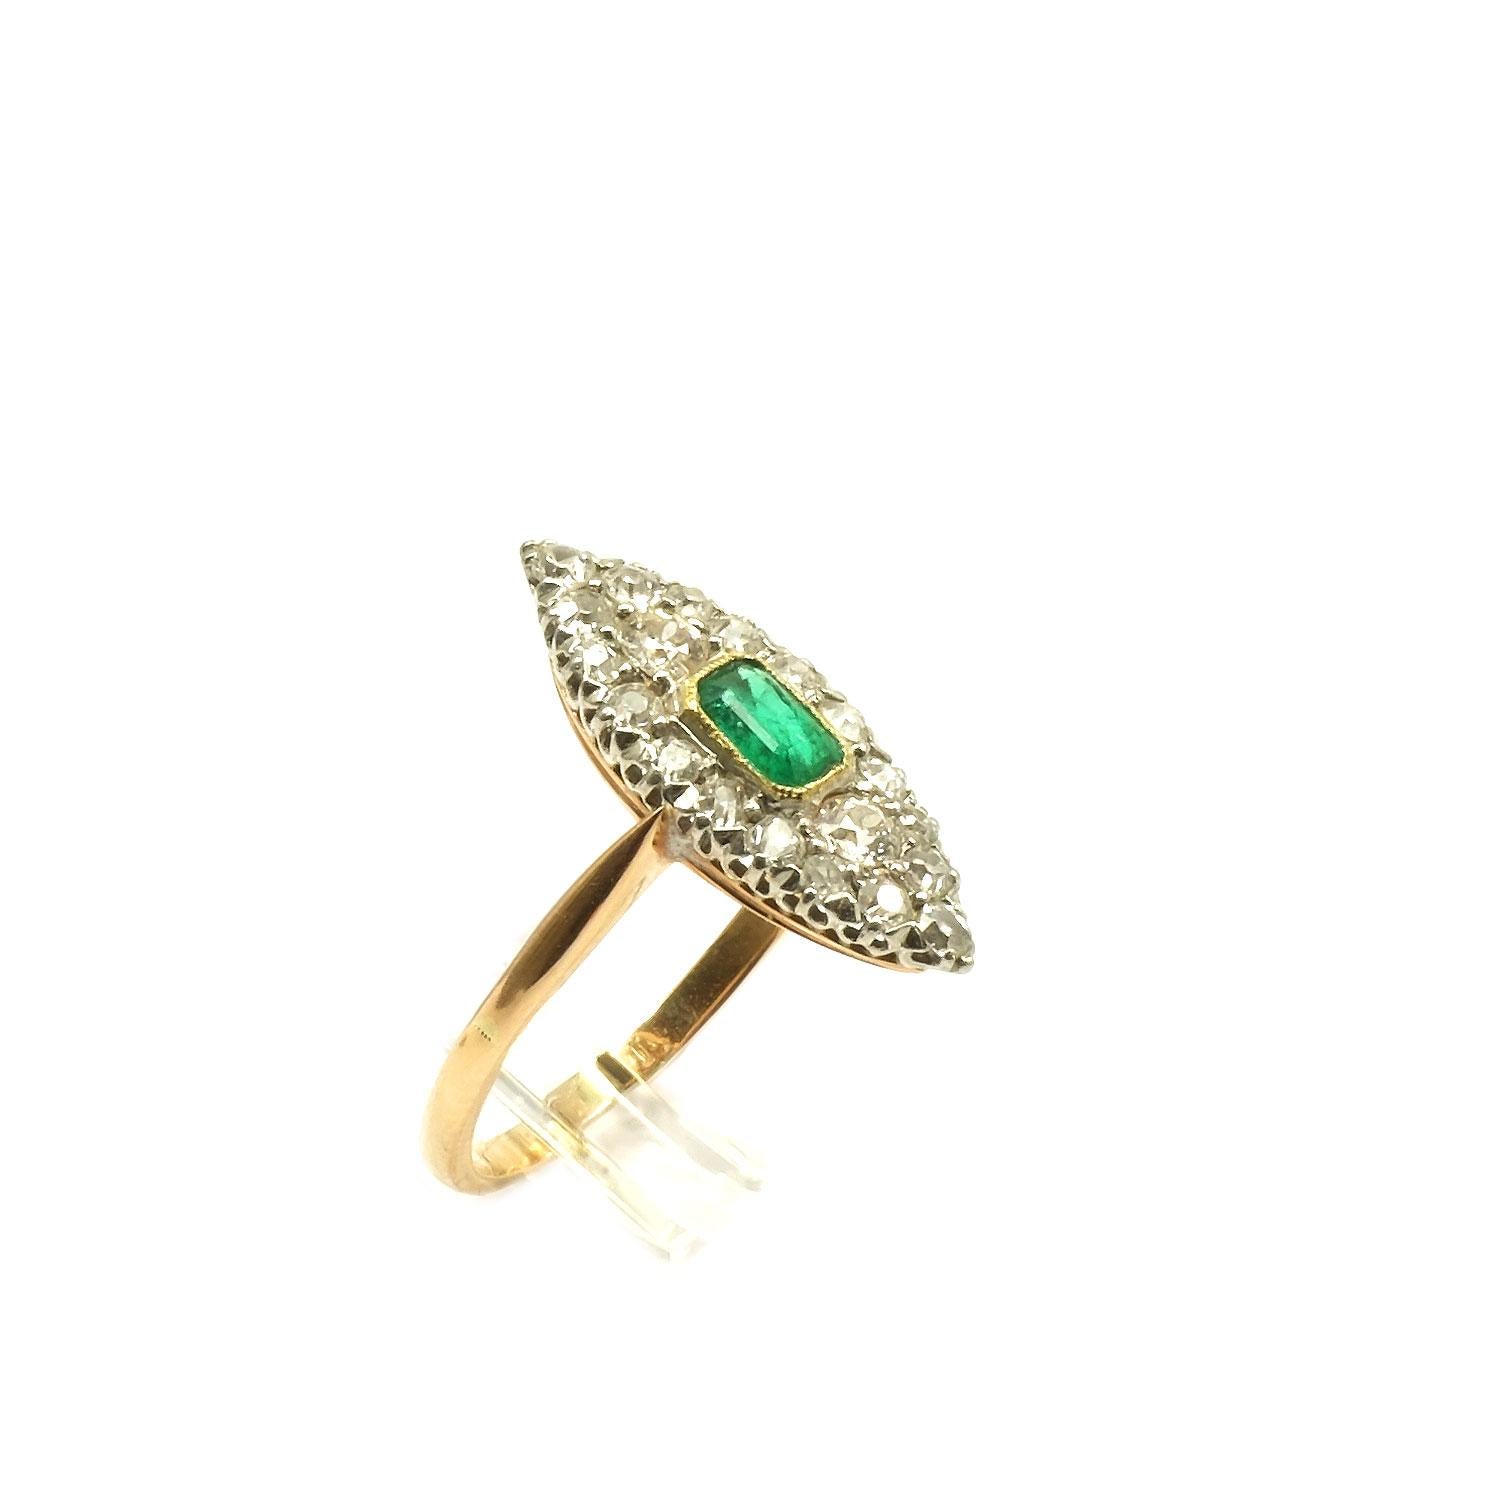 Edwardian Emerald and 0.78 Carat Diamond Gold Ring, cira 1915

Very elegant diamond ring made of rose gold with a boat-shaped ring head, densely set with a central, bright green emerald and pavé set with 26 old cut diamonds, 0.78 ct in total, set in